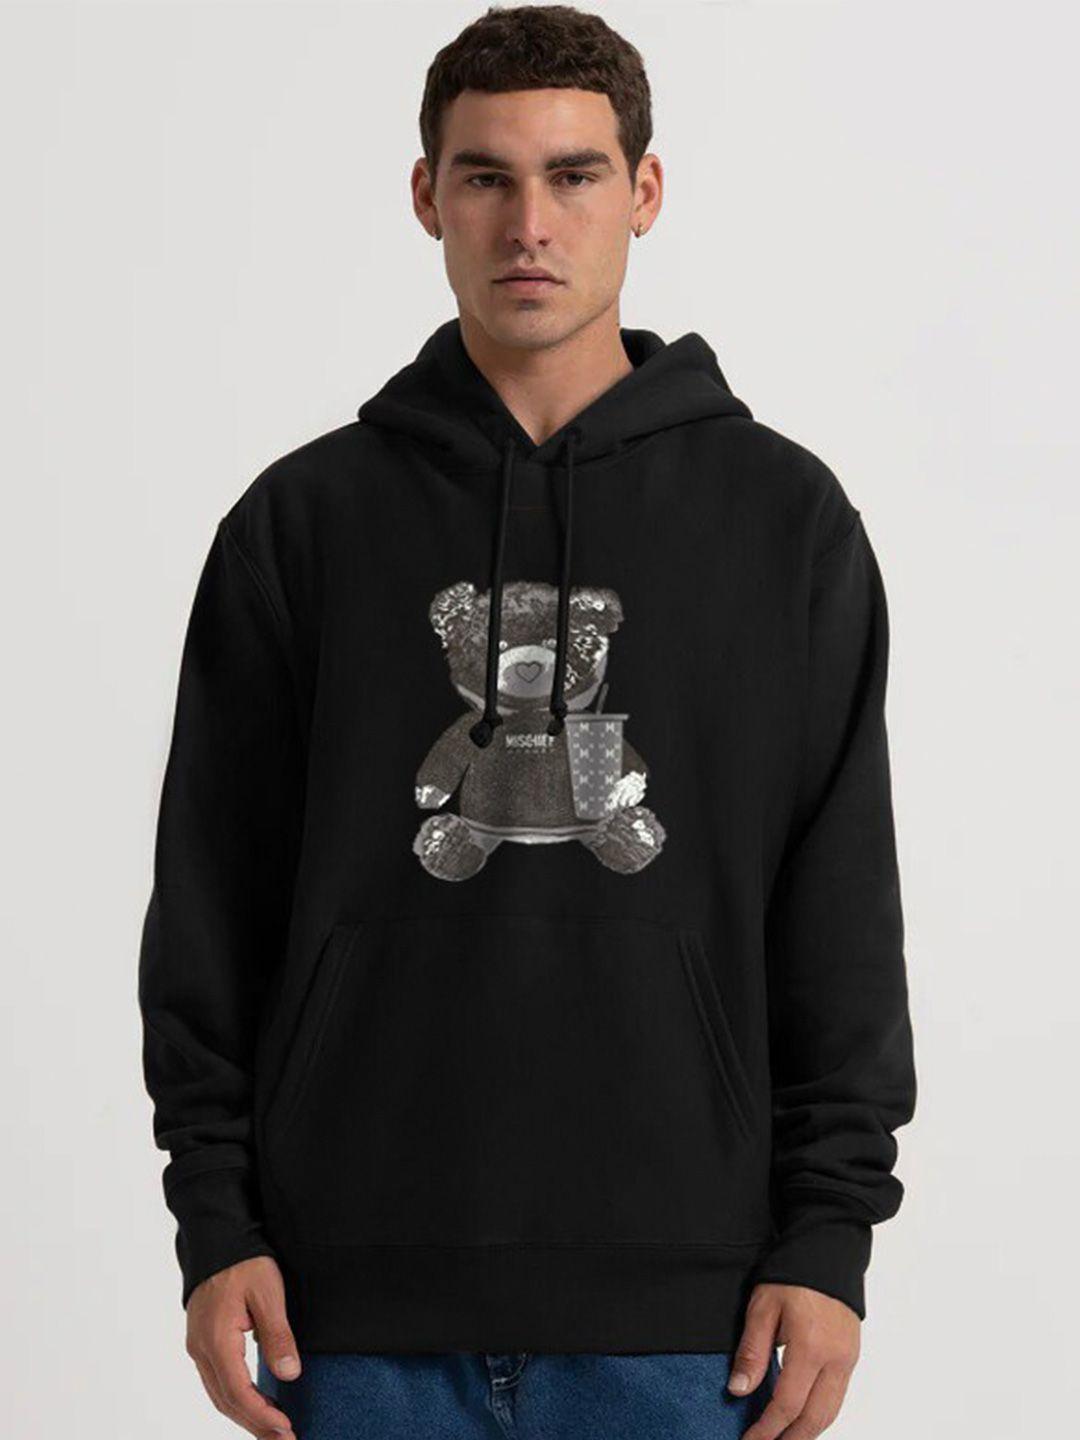 mischief monkey graphic printed ribbed hooded oversized pullover sweatshirt